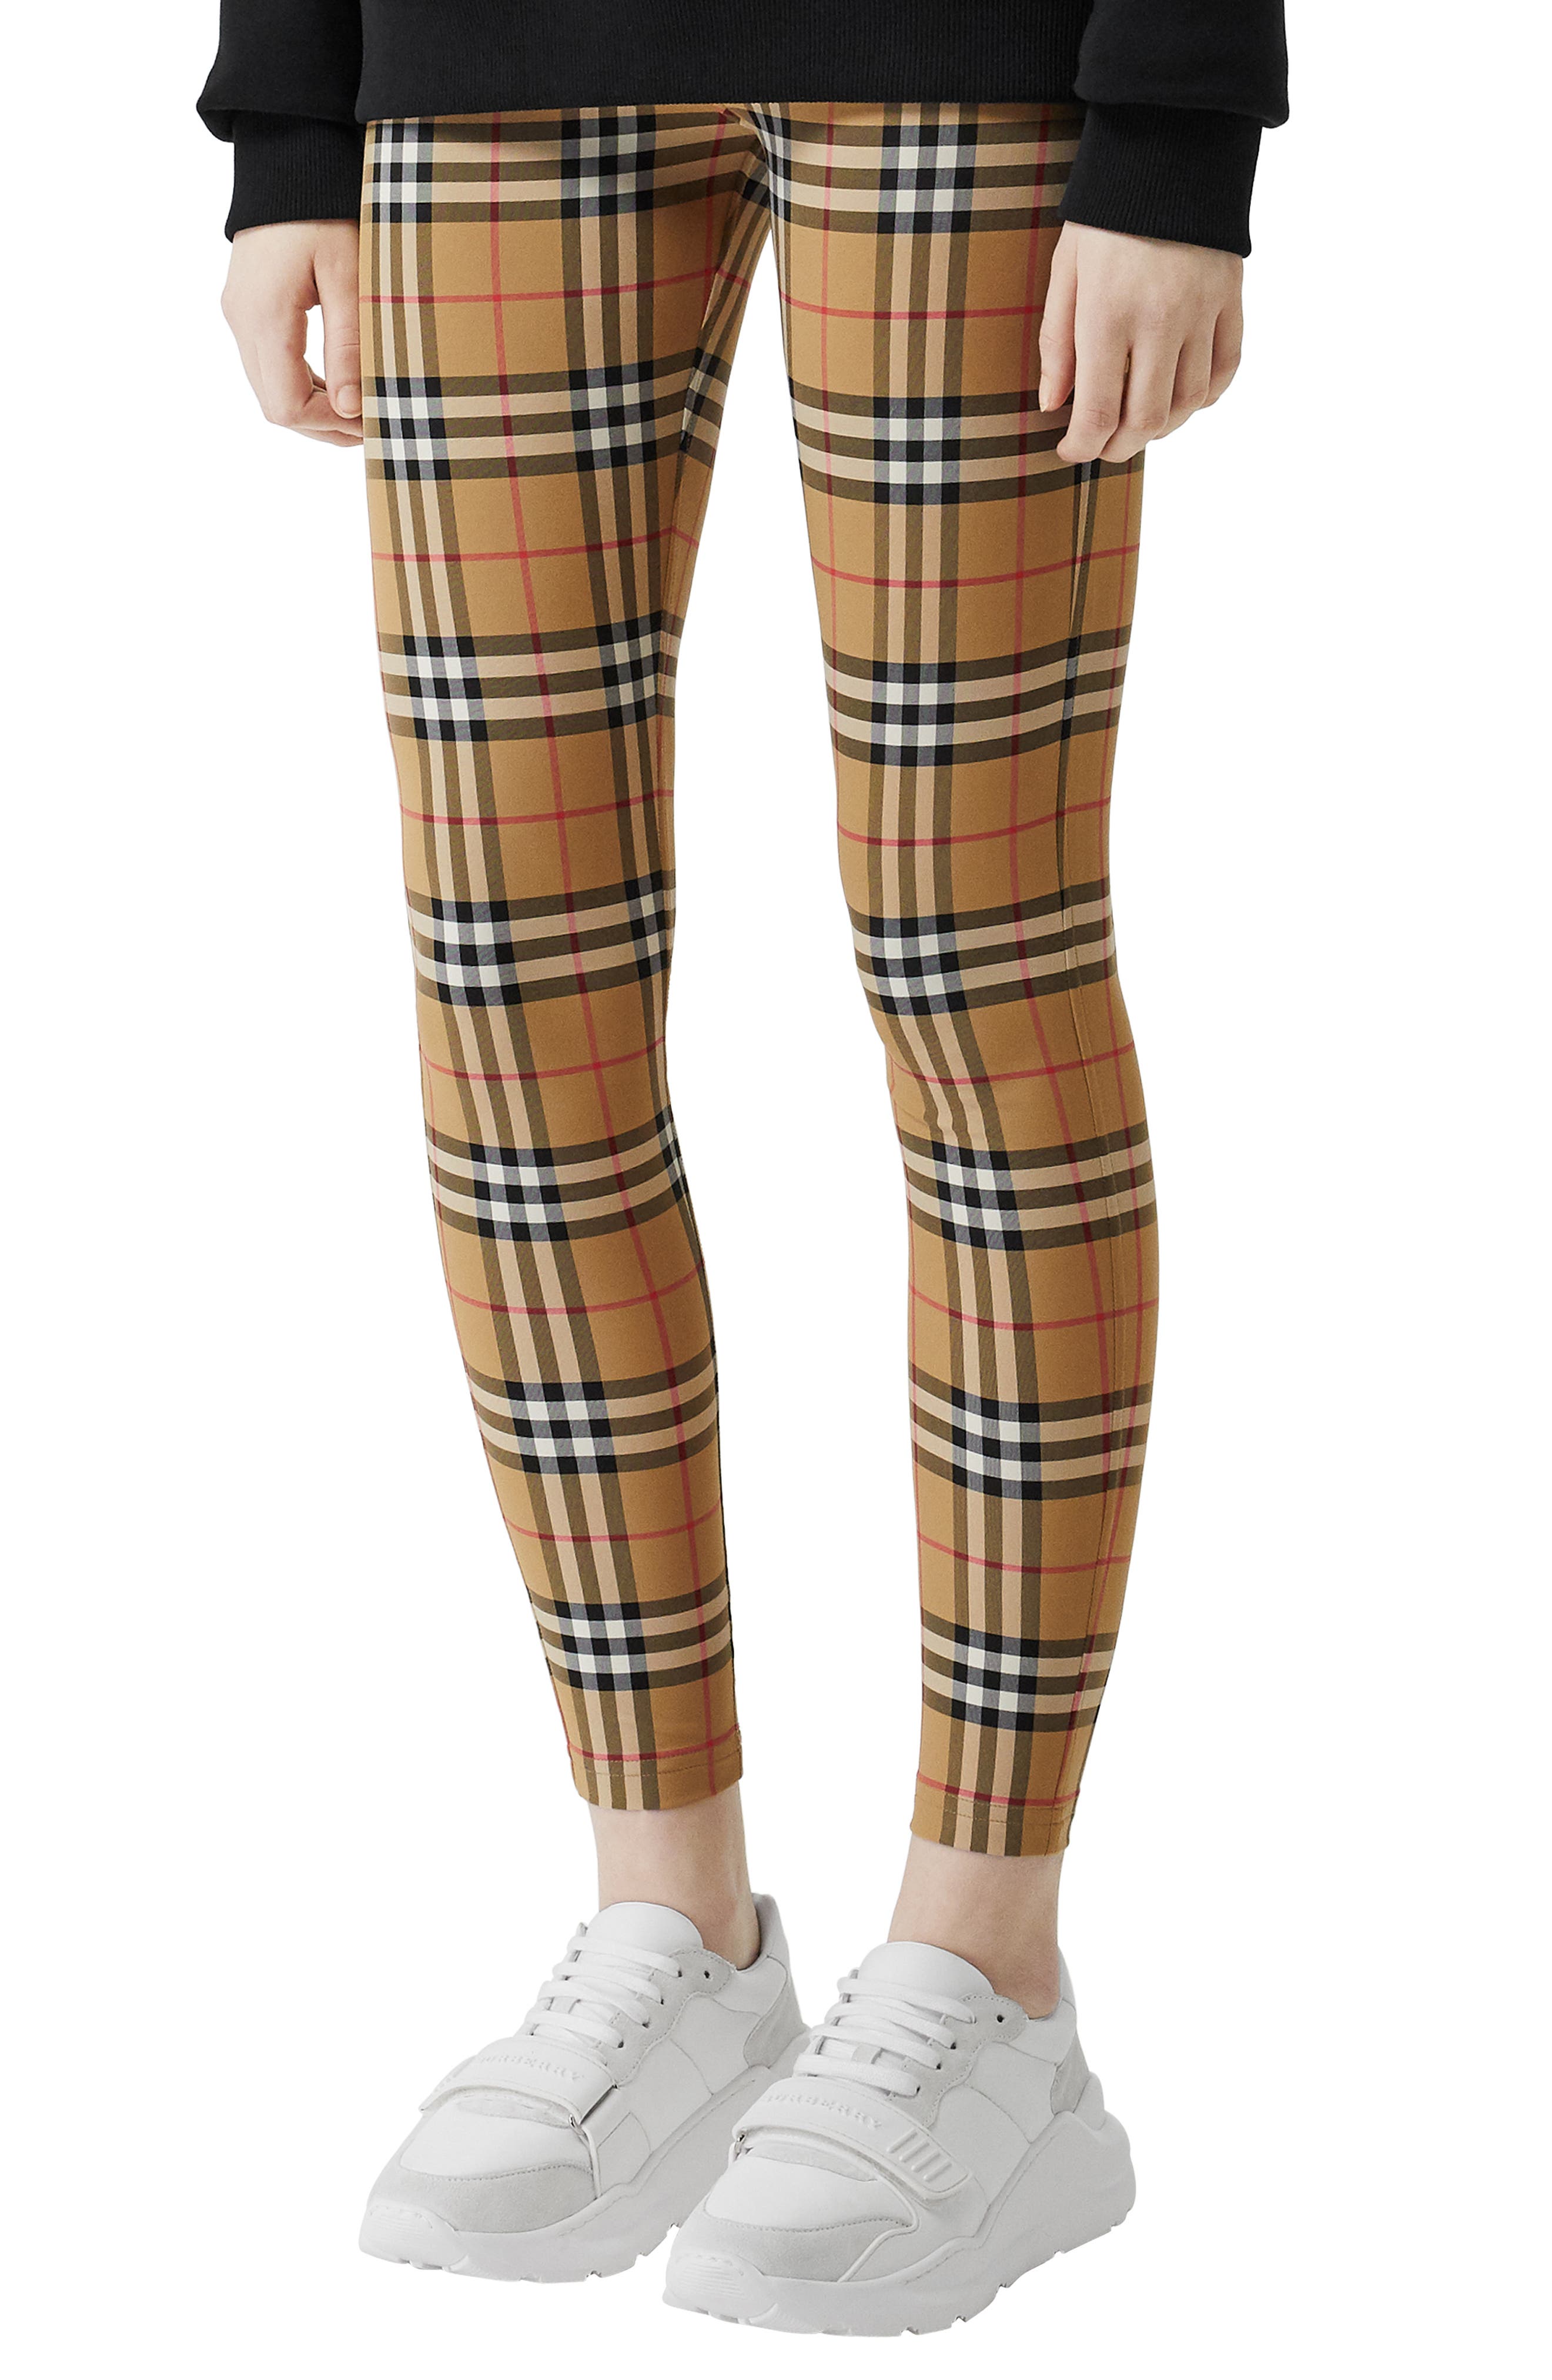 burberry inspired plaid pants